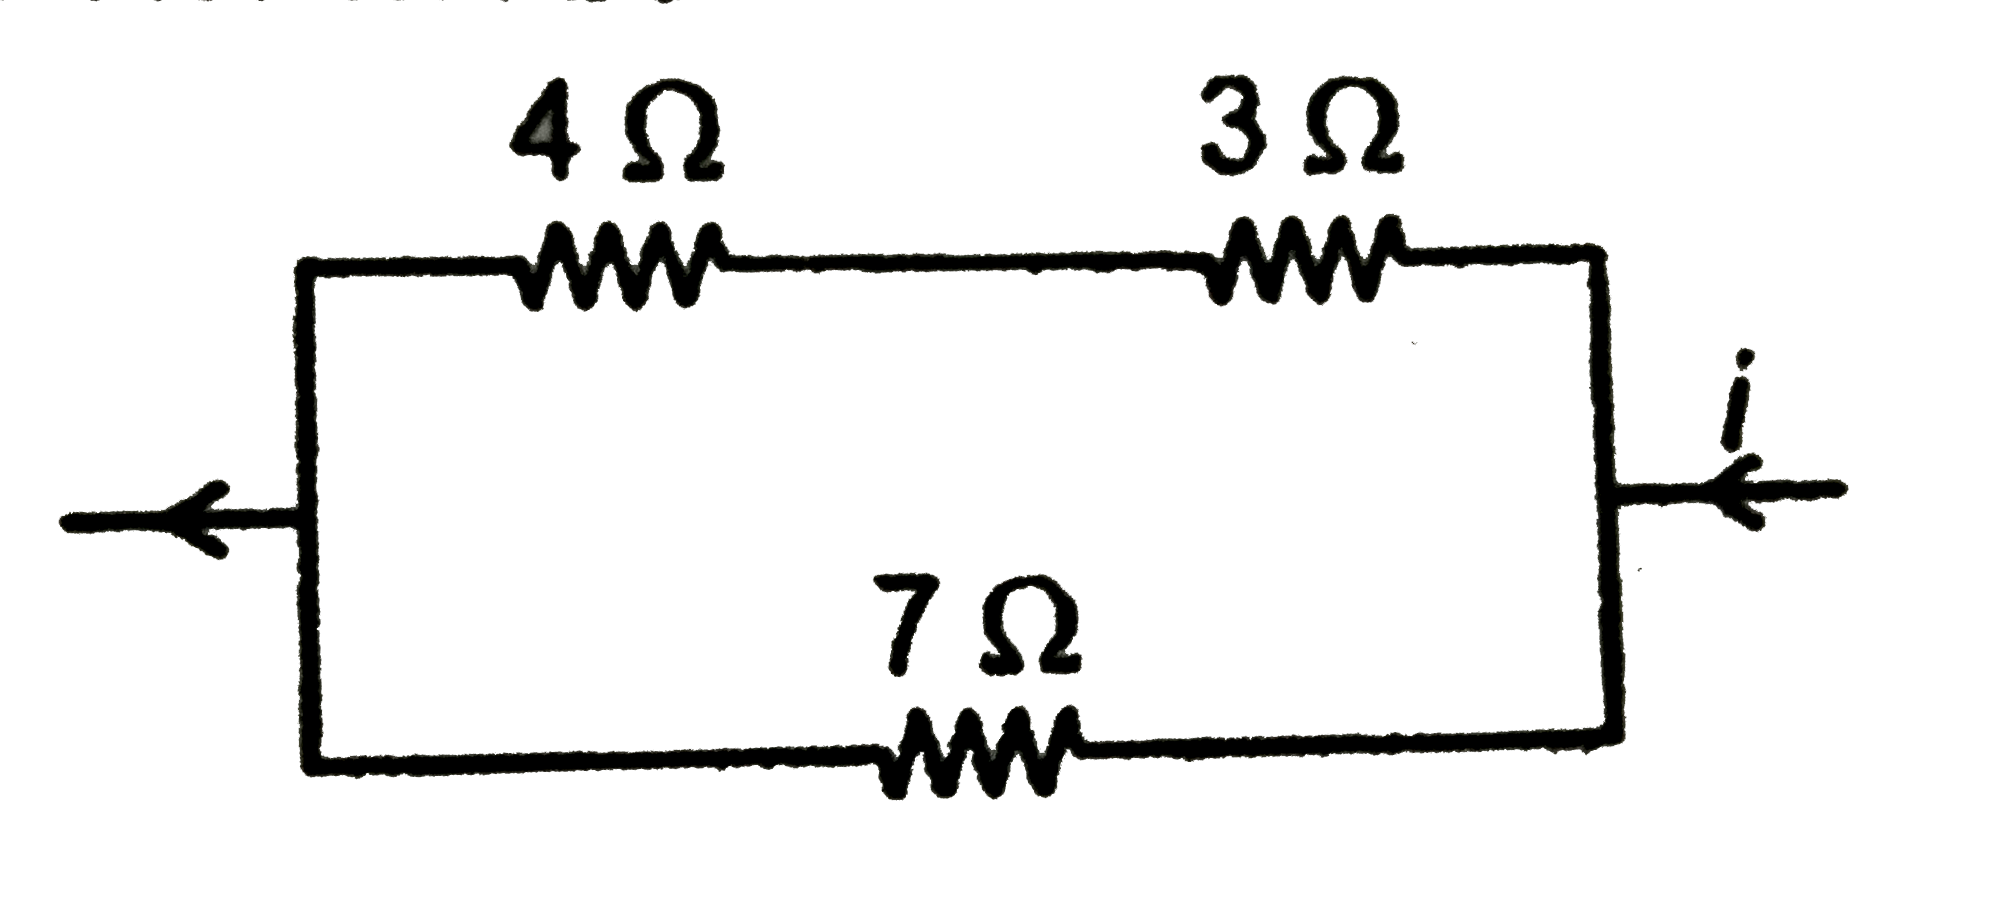 The power dissipated in 3Omega resistor in the circuits as shown in the figure is 2W. The power dissipated in 7Omega resistor will be